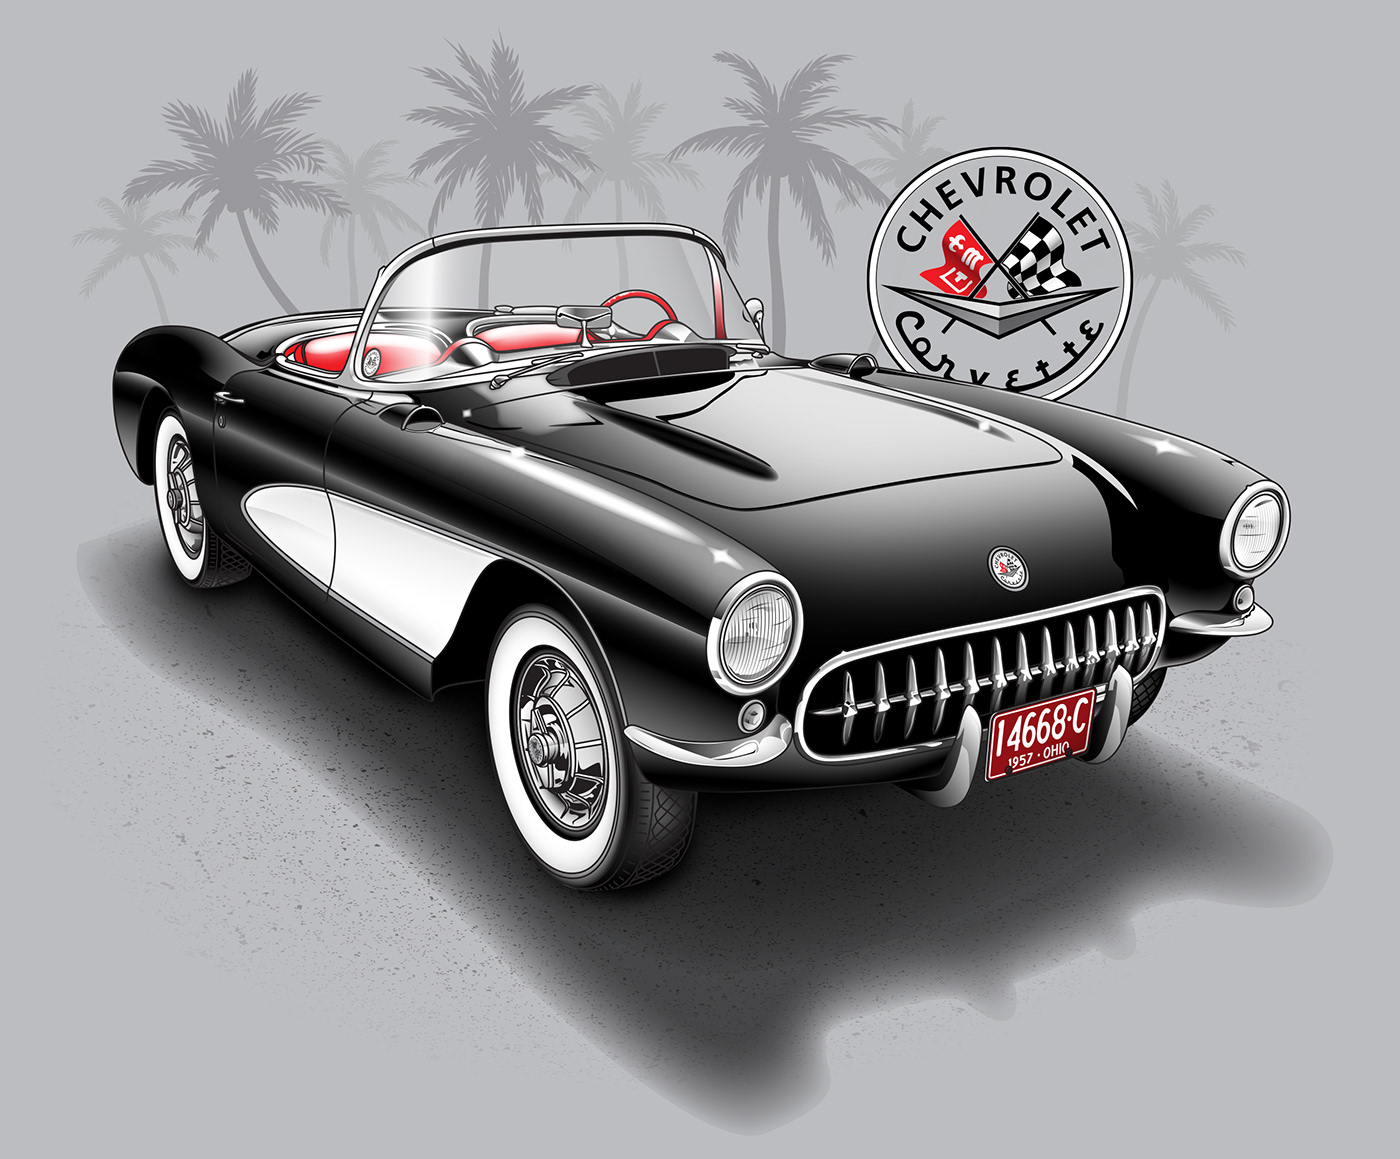 67' Corvette Stingray illustration sitting on a beach with palm trees in the background